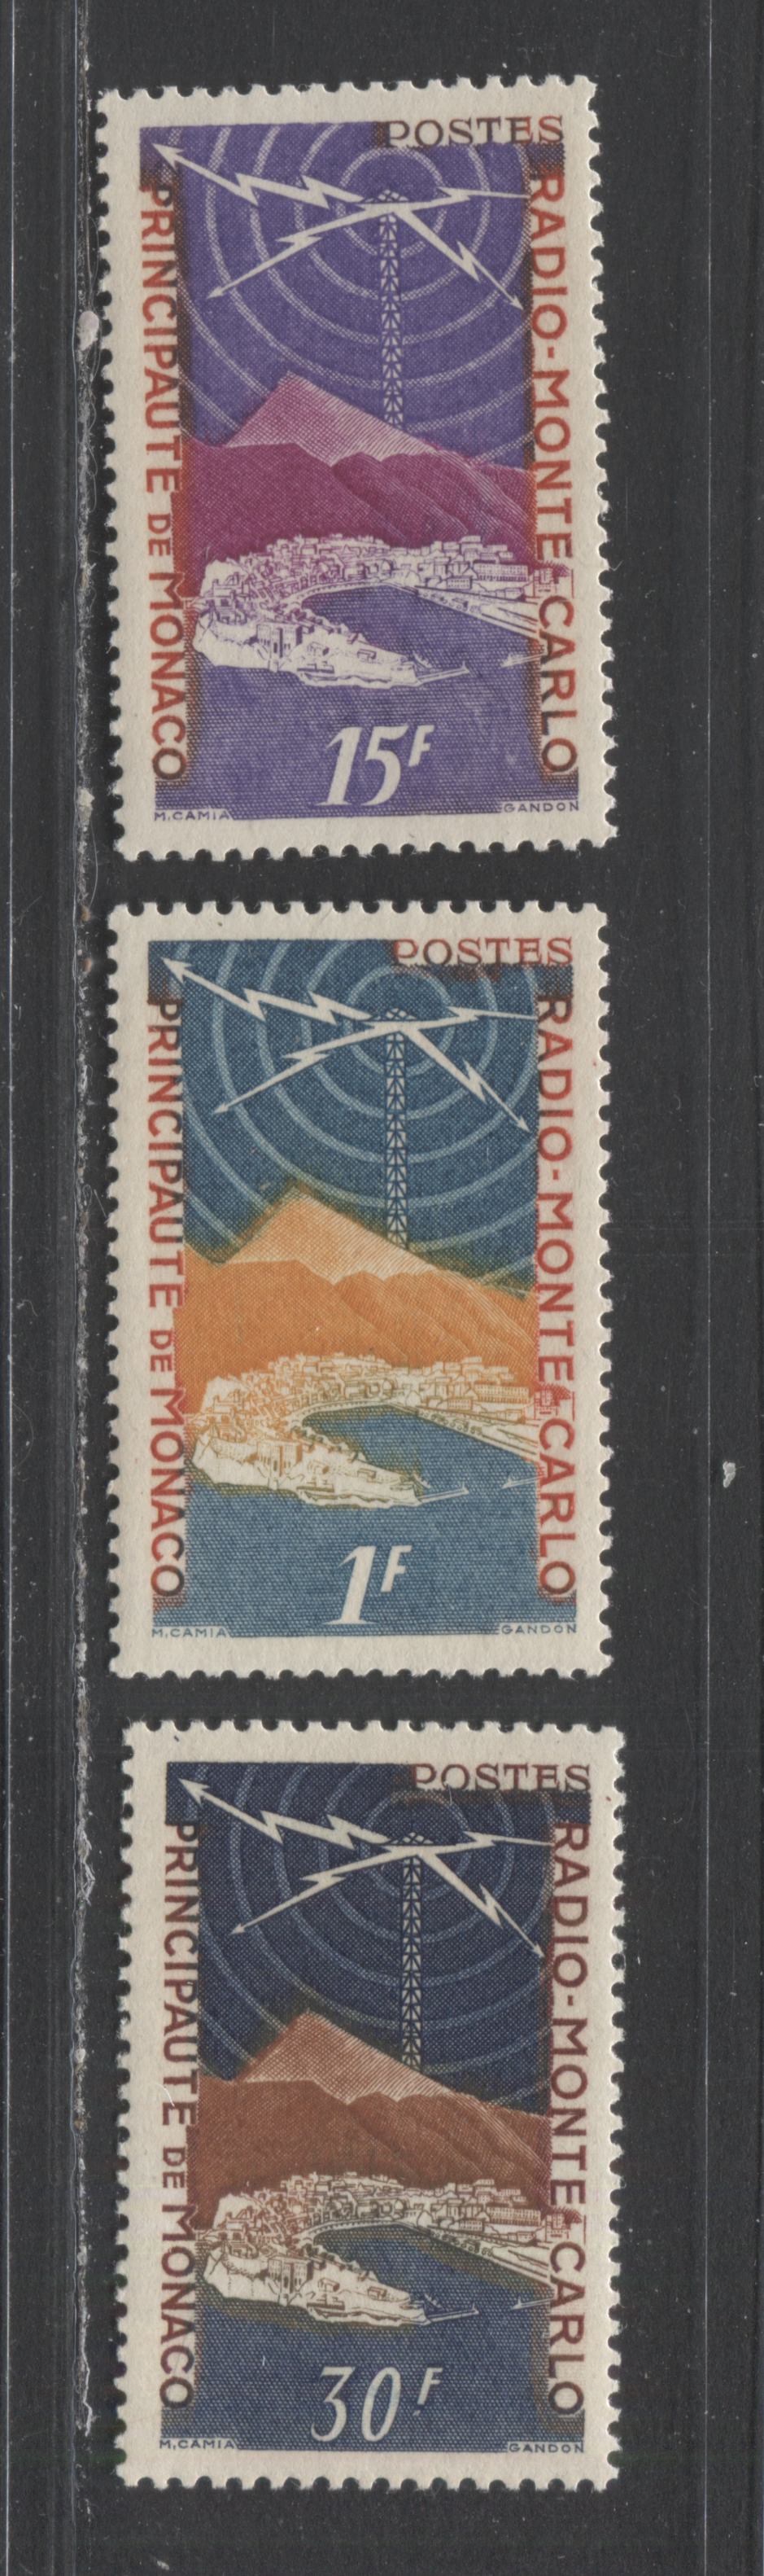 Lot 119 Monaco SC#280-282 1951 Radio Monte-Carlo Issue, A VFOG Range Of Singles, 2017 Scott Cat. $25.25 USD, Click on Listing to See ALL Pictures